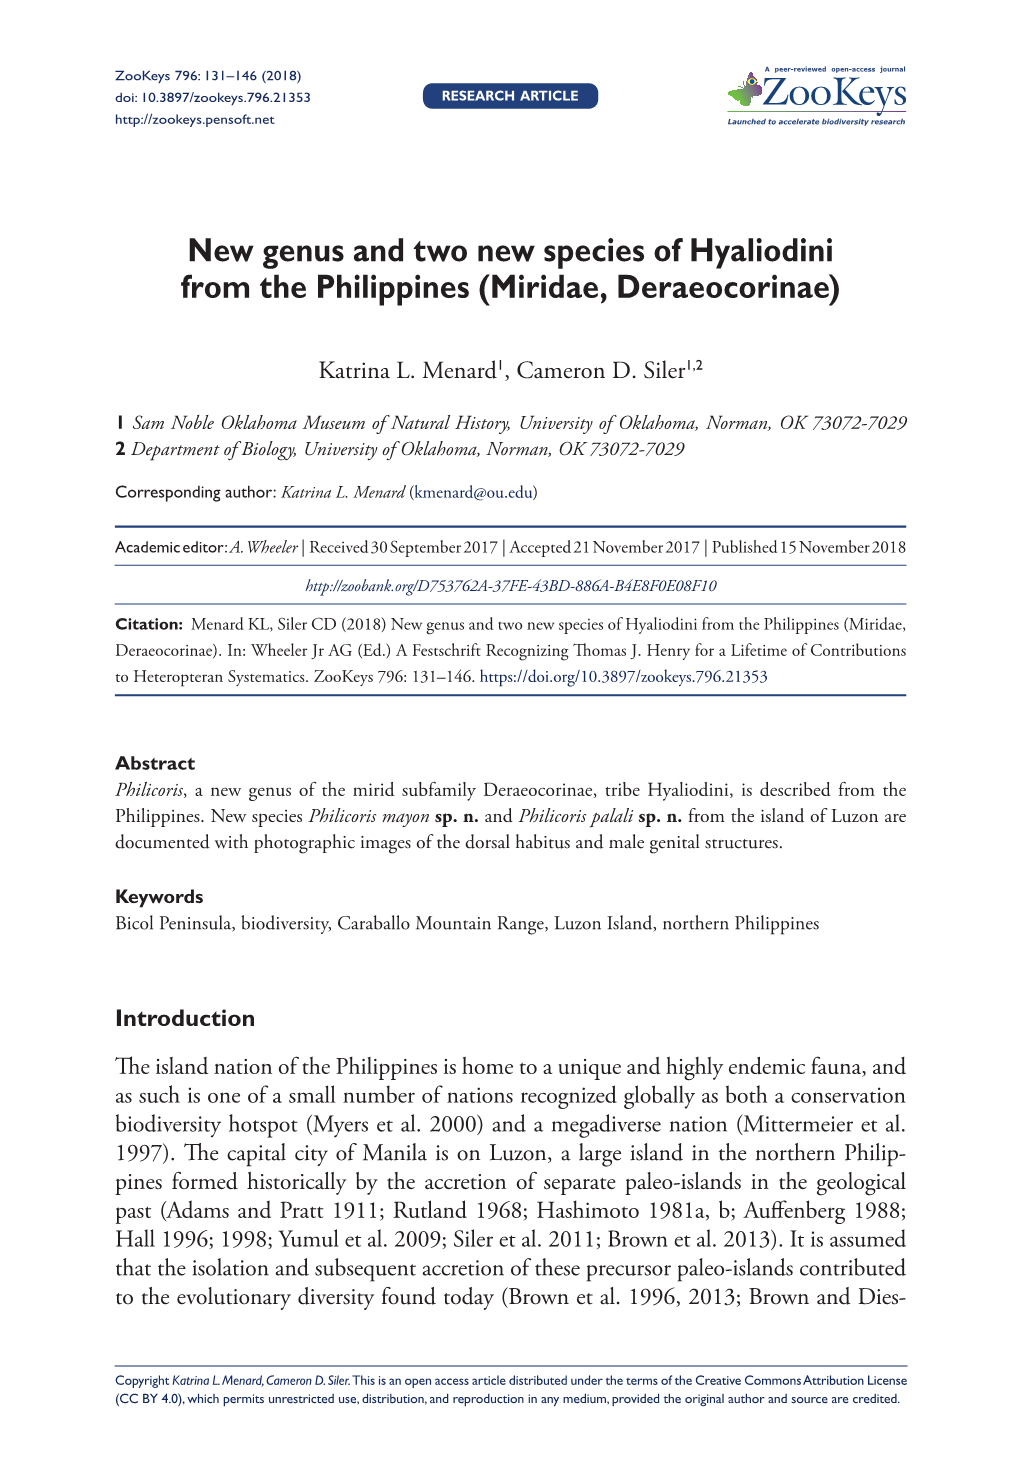 New Genus and Two New Species of Hyaliodini from the Philippines (Miridae, Deraeocorinae)